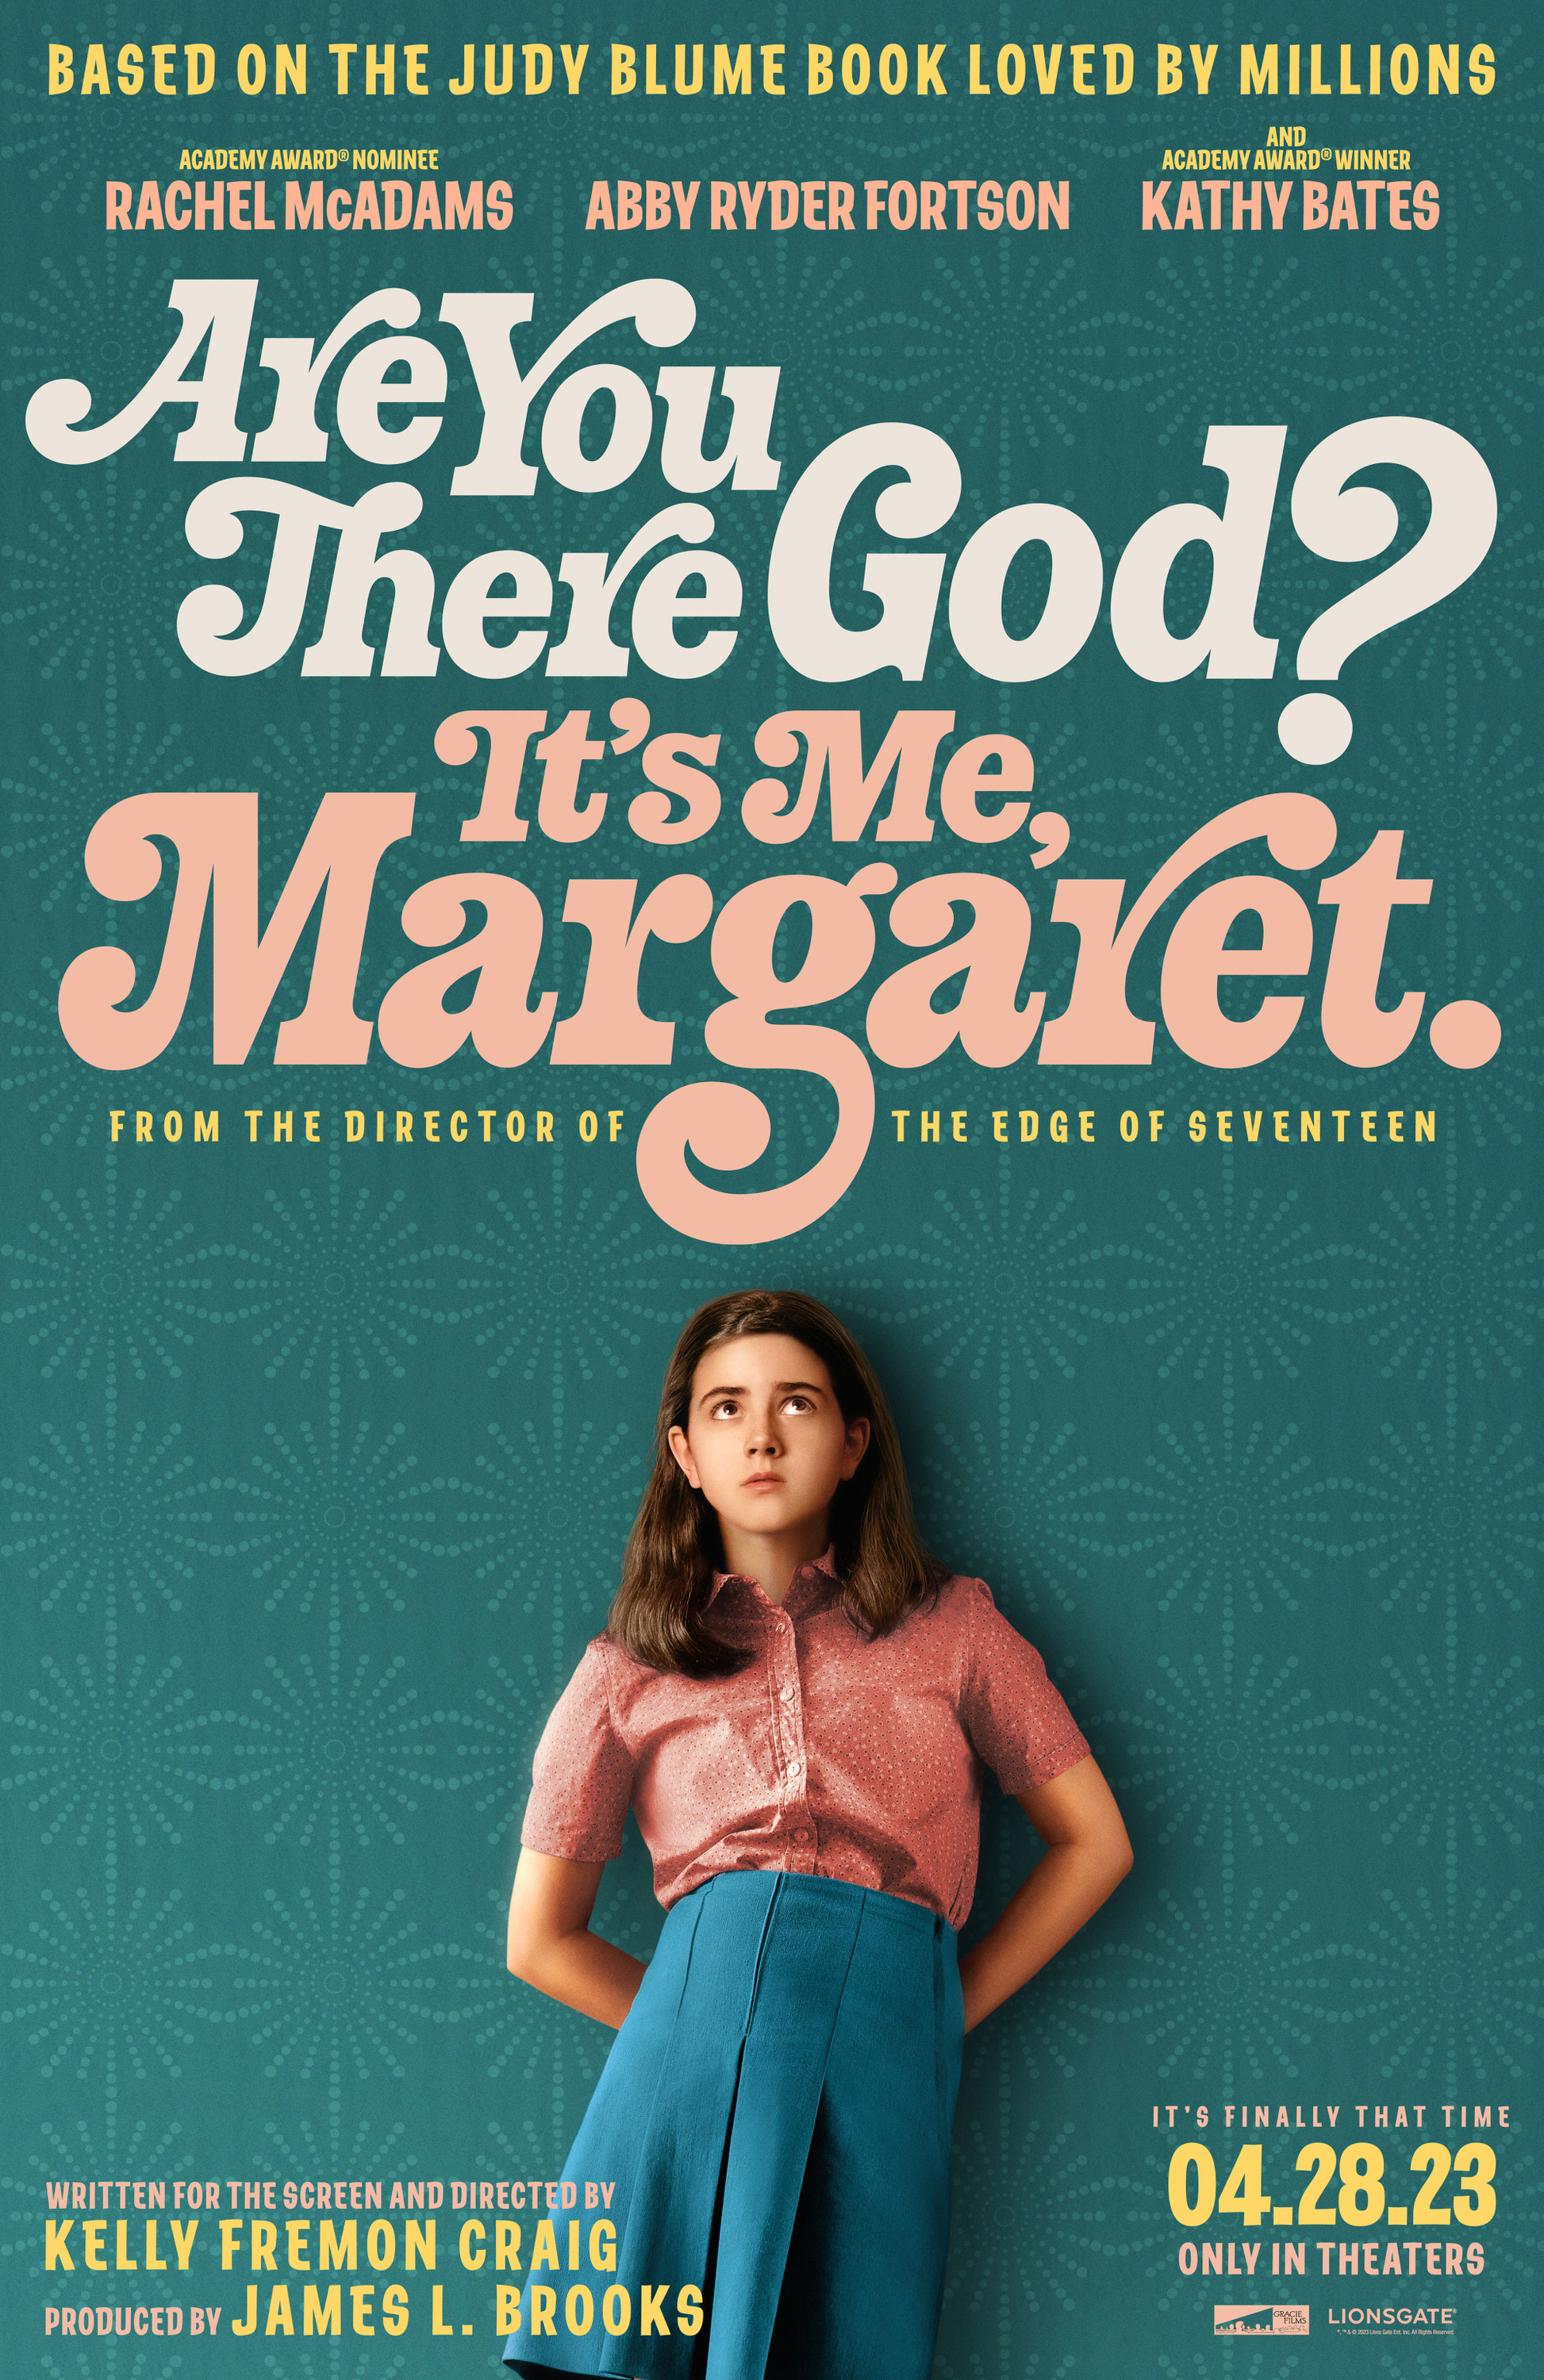 Cover Art for "Are You There God? It's Me Margaret"